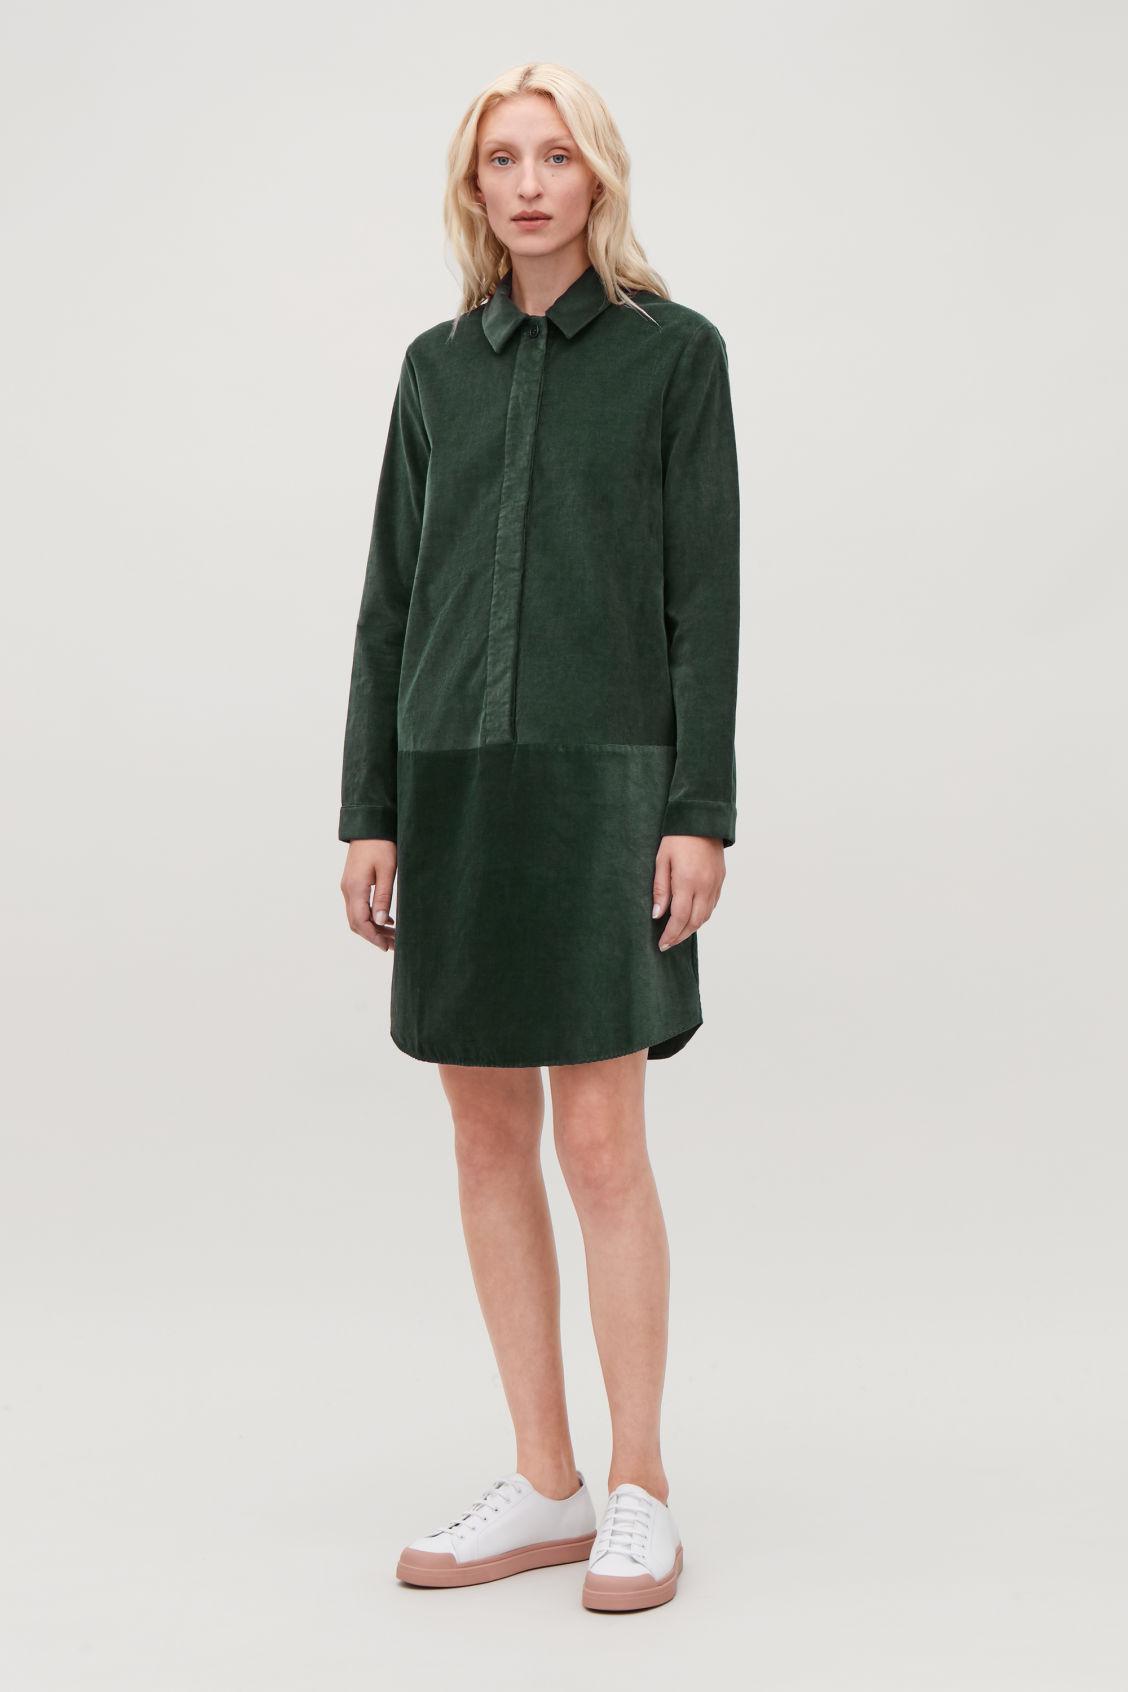 COS A-line Corduroy Shirt Dress in ...